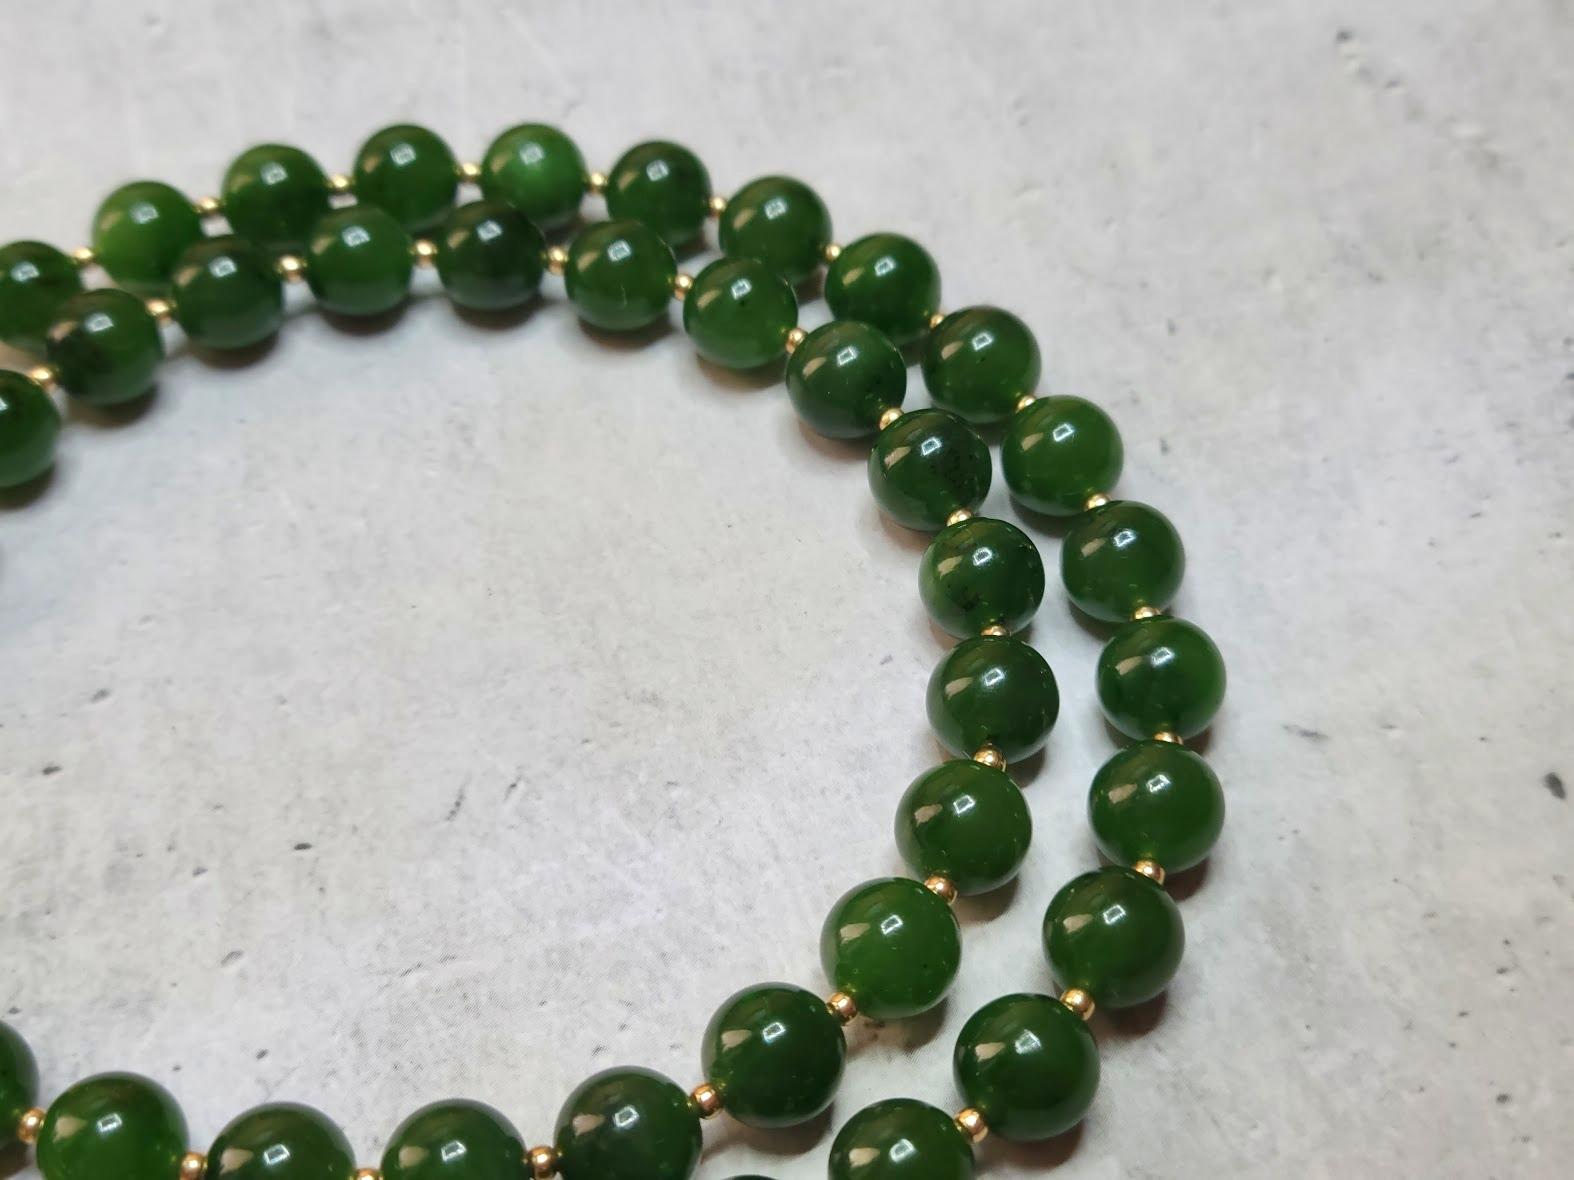 This beautiful, elegant, timeless necklace is made of high-quality natural Russian Siberian nephrite. The nephrite beads are top quality, uniform deep green, and they're sumptuous in how they look and feel. Authentic, natural color. No thermal or